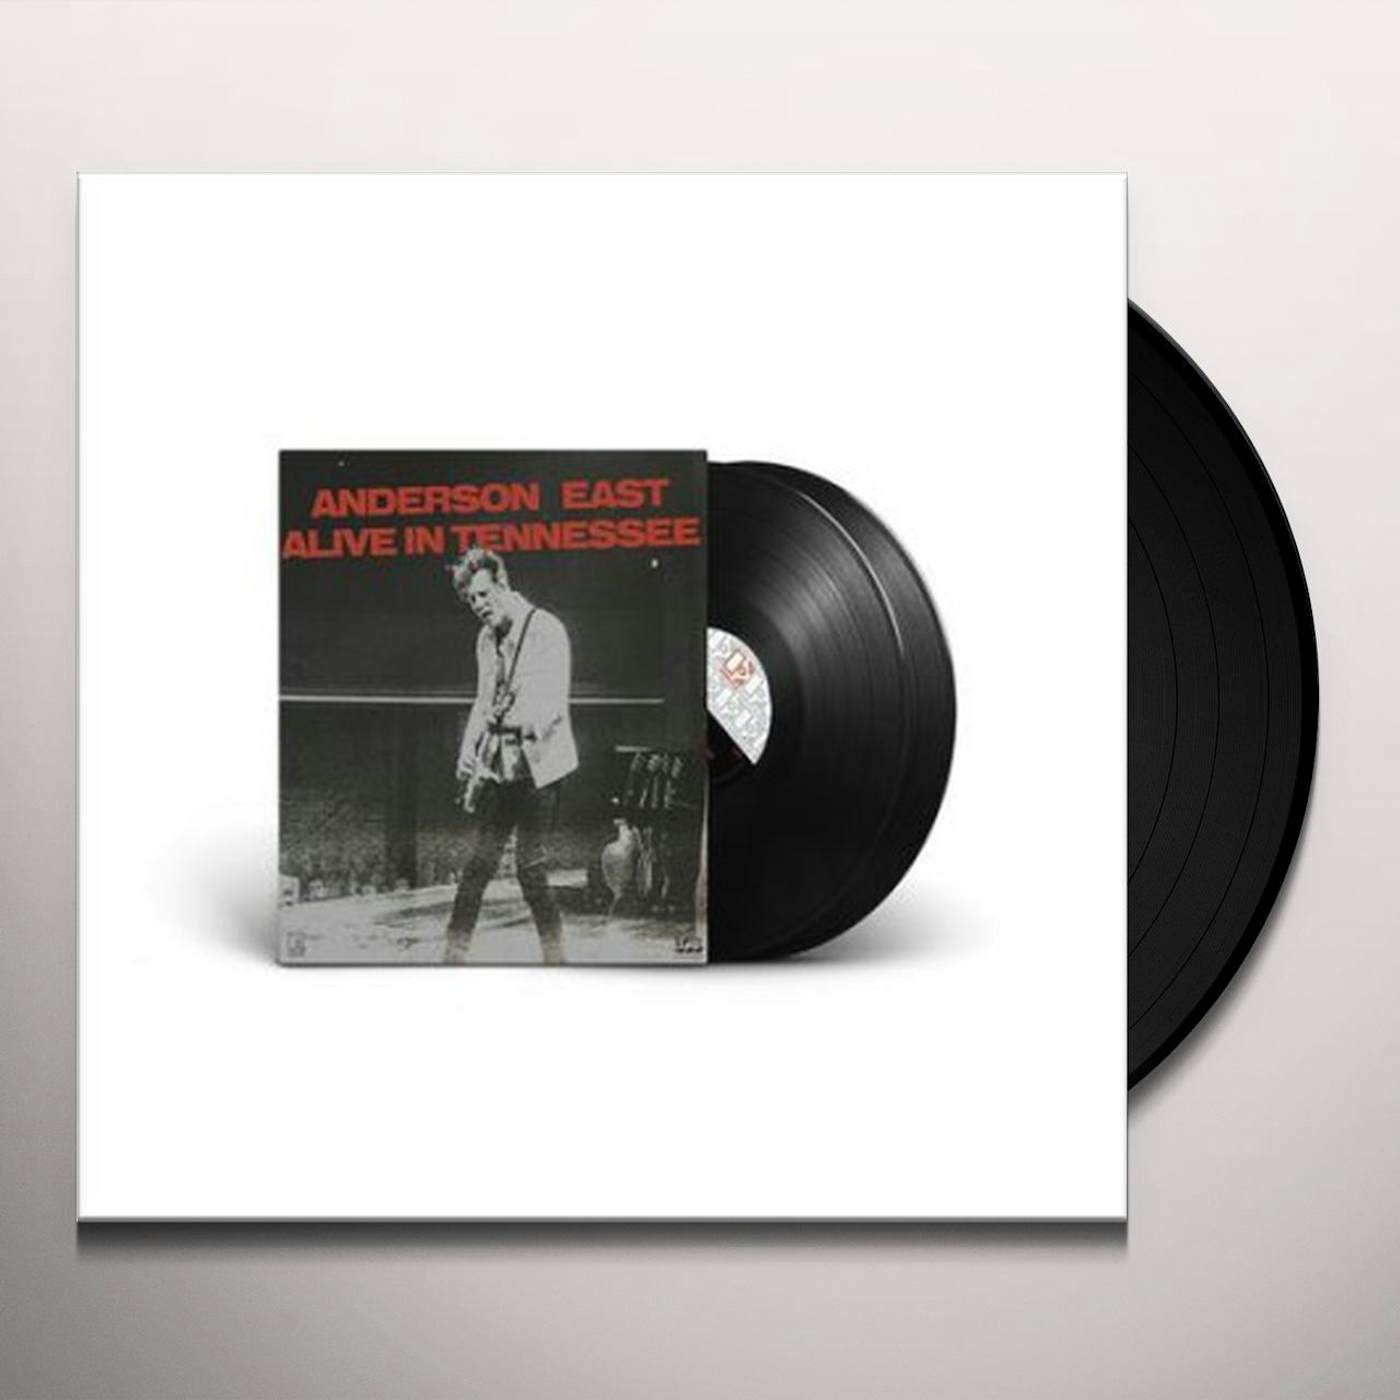 Anderson East Alive In Tennessee Vinyl Record